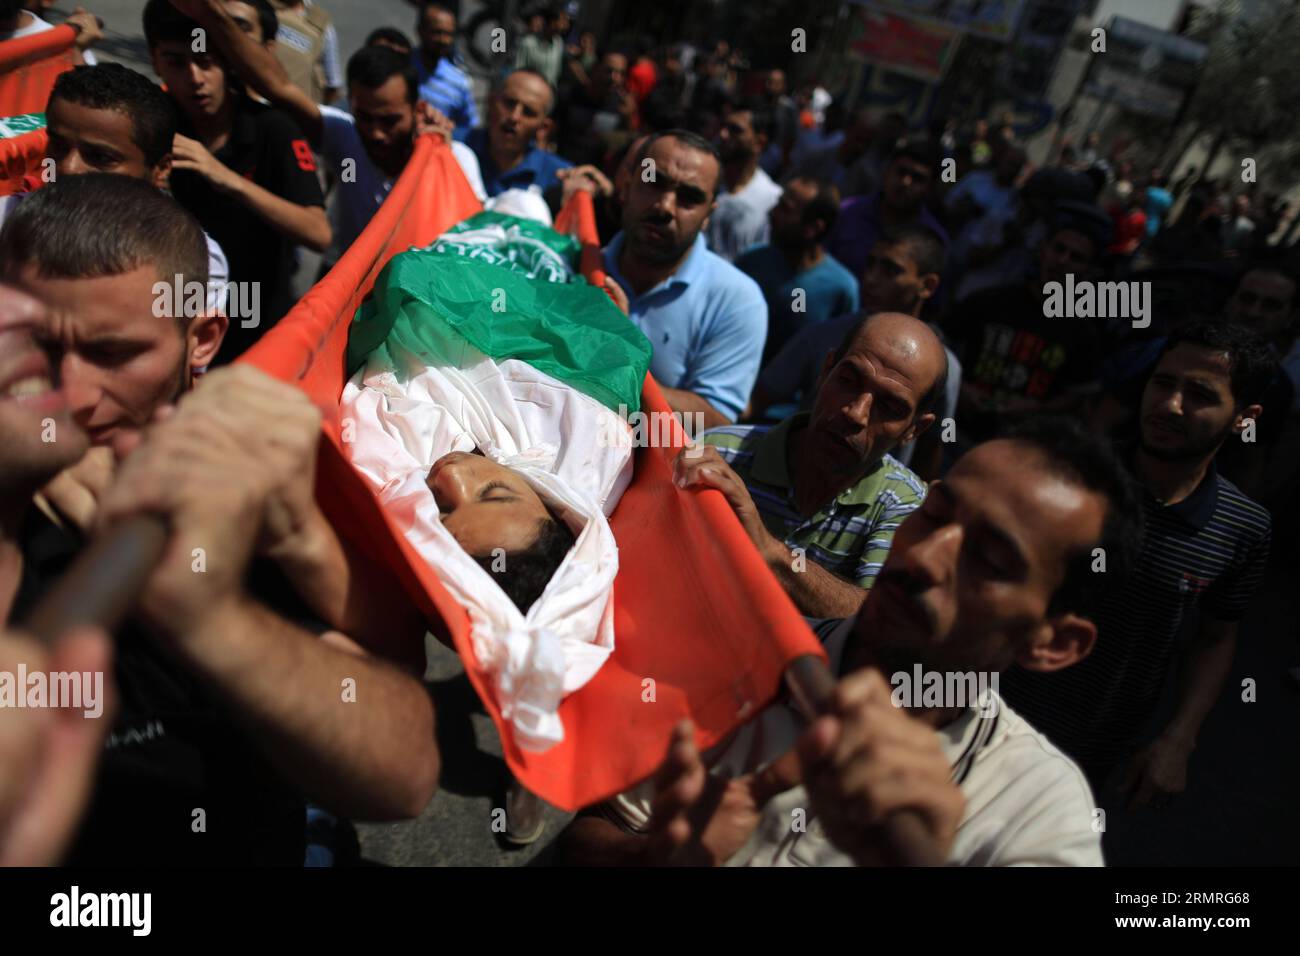 GAZA, July 18, 2014 (Xinhua) -- People carry the body of Walaa Abu Musallam, a Palestinian girl who was killed along with her two brothers in an Israeli tank attack, during their funeral in northern Gaza strip town of Beit Lahia, on July 18, 2014. (Xinhua/Wissam Nassar)(zhf) MIDEAST-GAZA-FUNERAL PUBLICATIONxNOTxINxCHN   Gaza July 18 2014 XINHUA Celebrities Carry The Body of  Abu Musallam a PALESTINIAN Girl Who what KILLED Along With her Two Brothers in to Israeli Tank Attack during their Funeral in Northern Gaza Strip Town of Beit Lahia ON July 18 2014 XINHUA Wissam Nassar  Mideast Gaza Funera Stock Photo